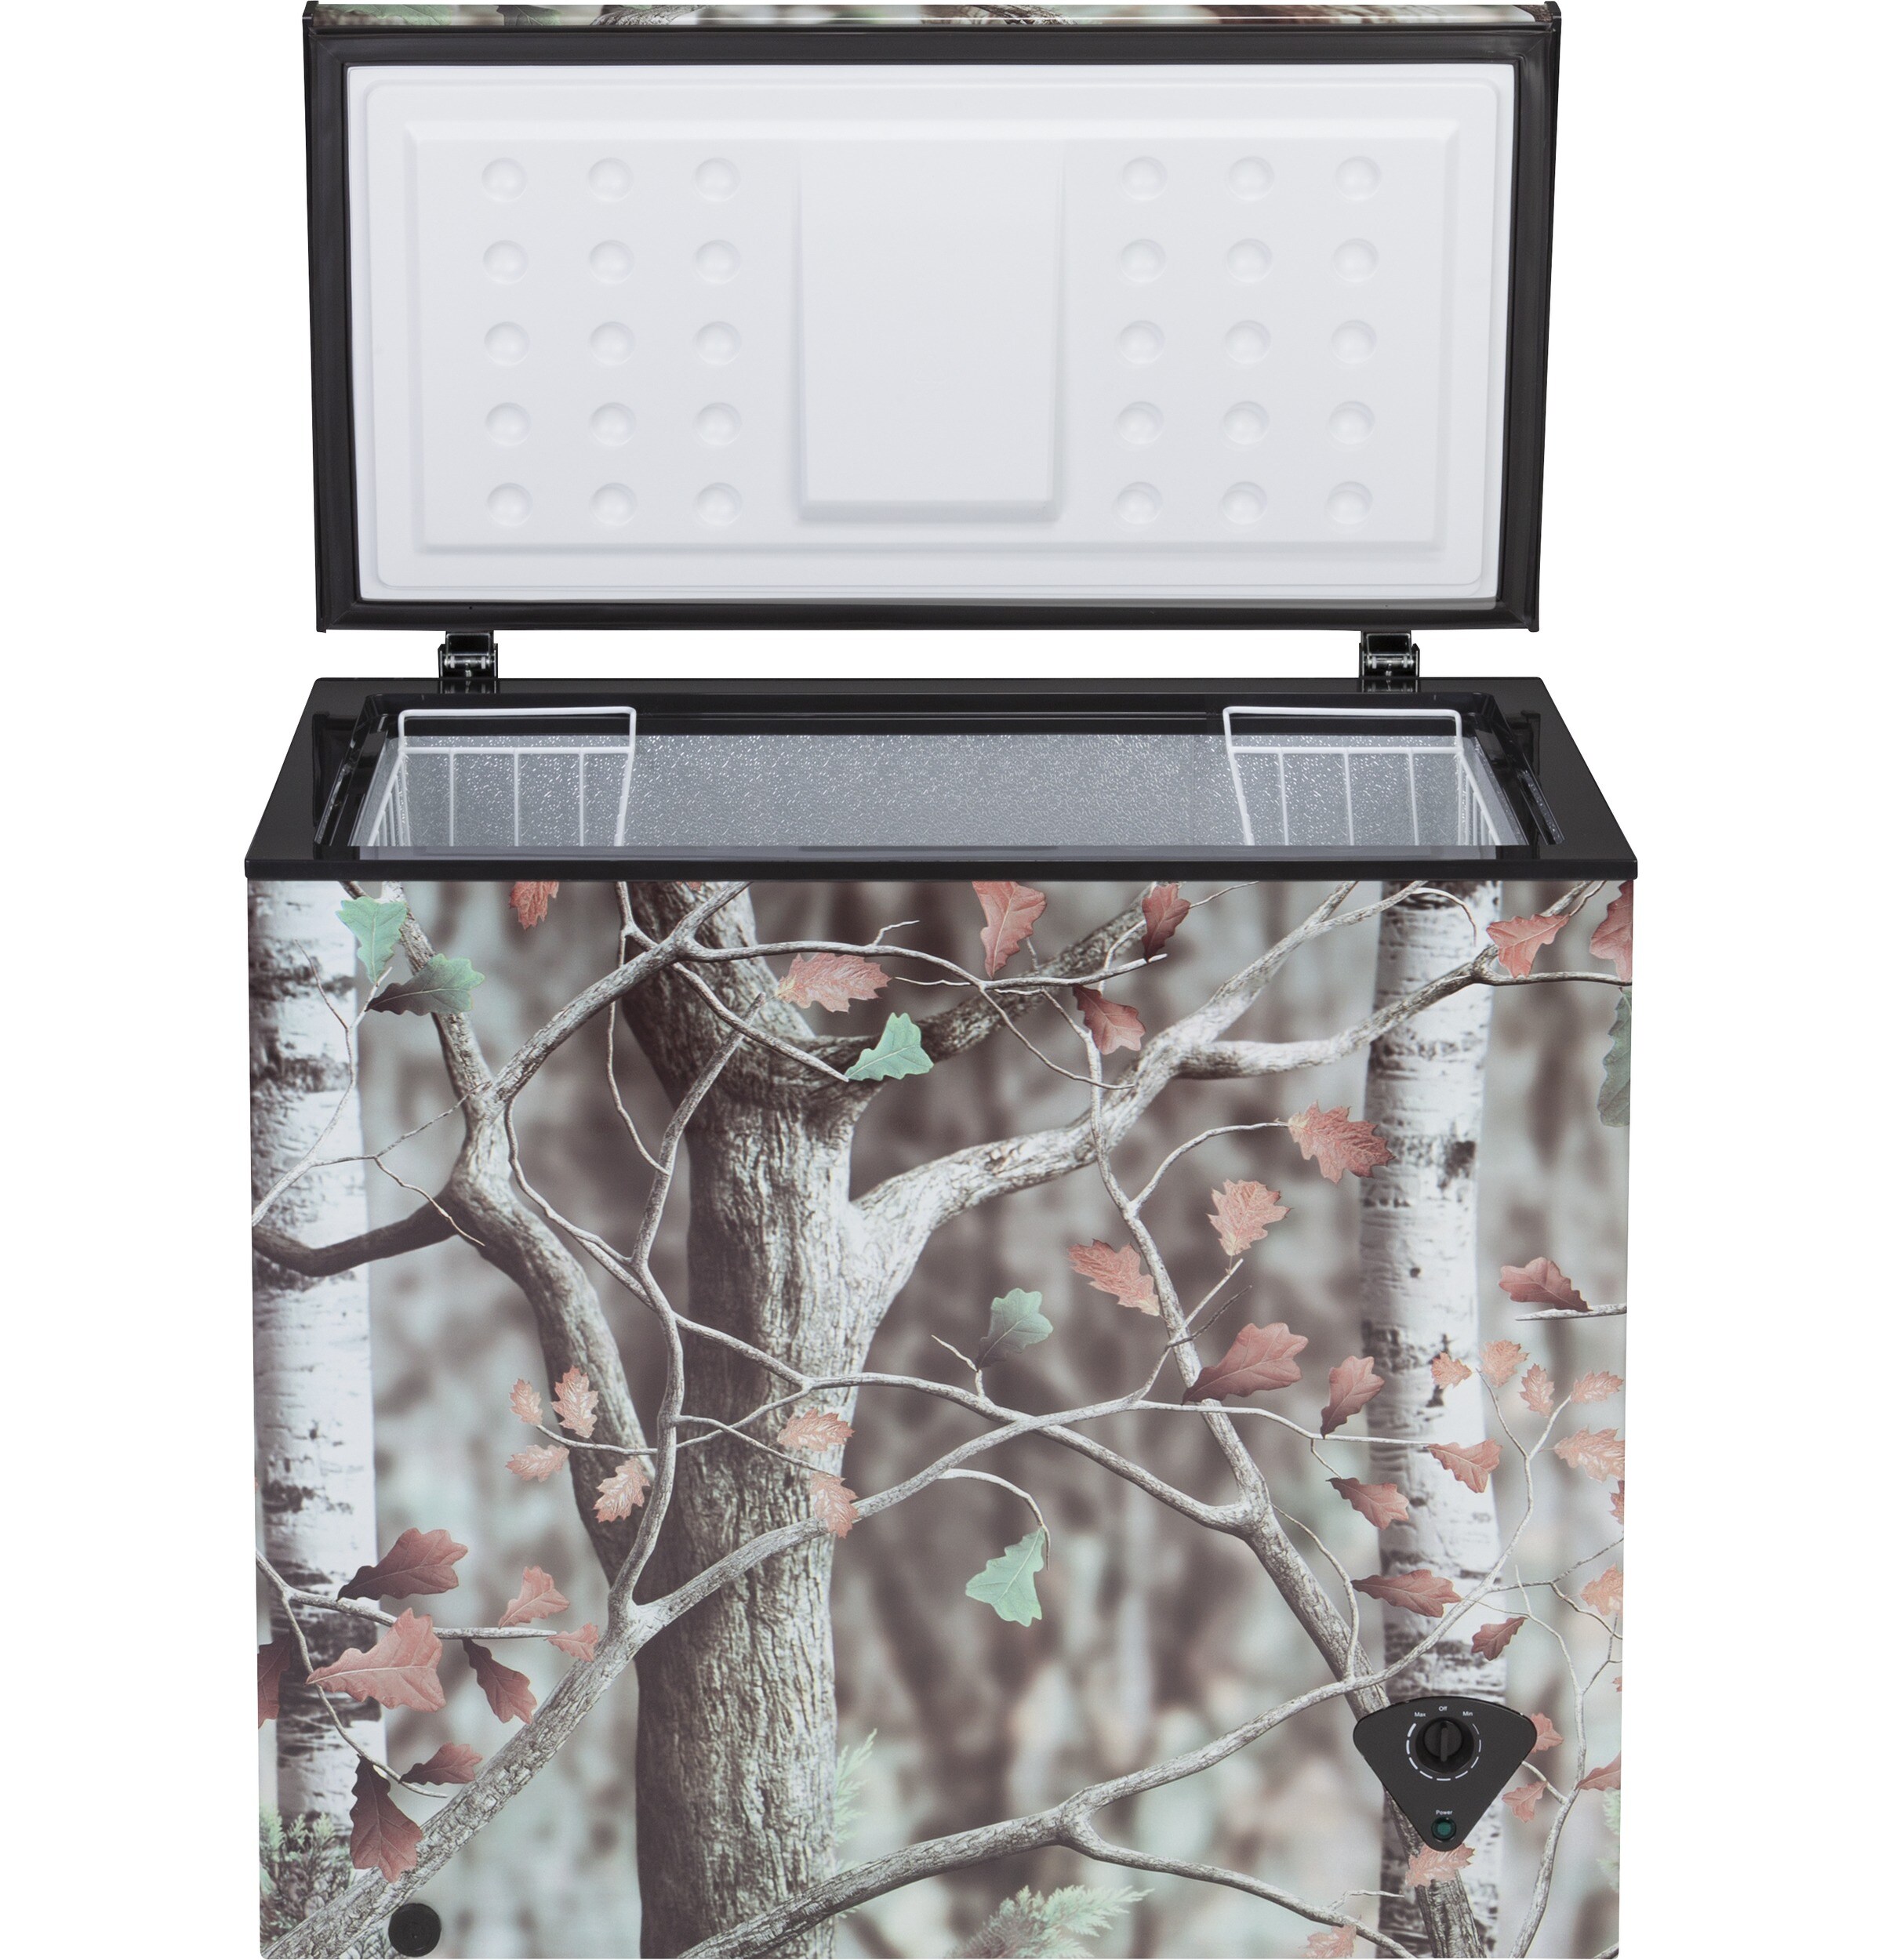 16 CF Manual Defrost Chest Freezer Mossy Oak Camouflage Finish from Crosley 